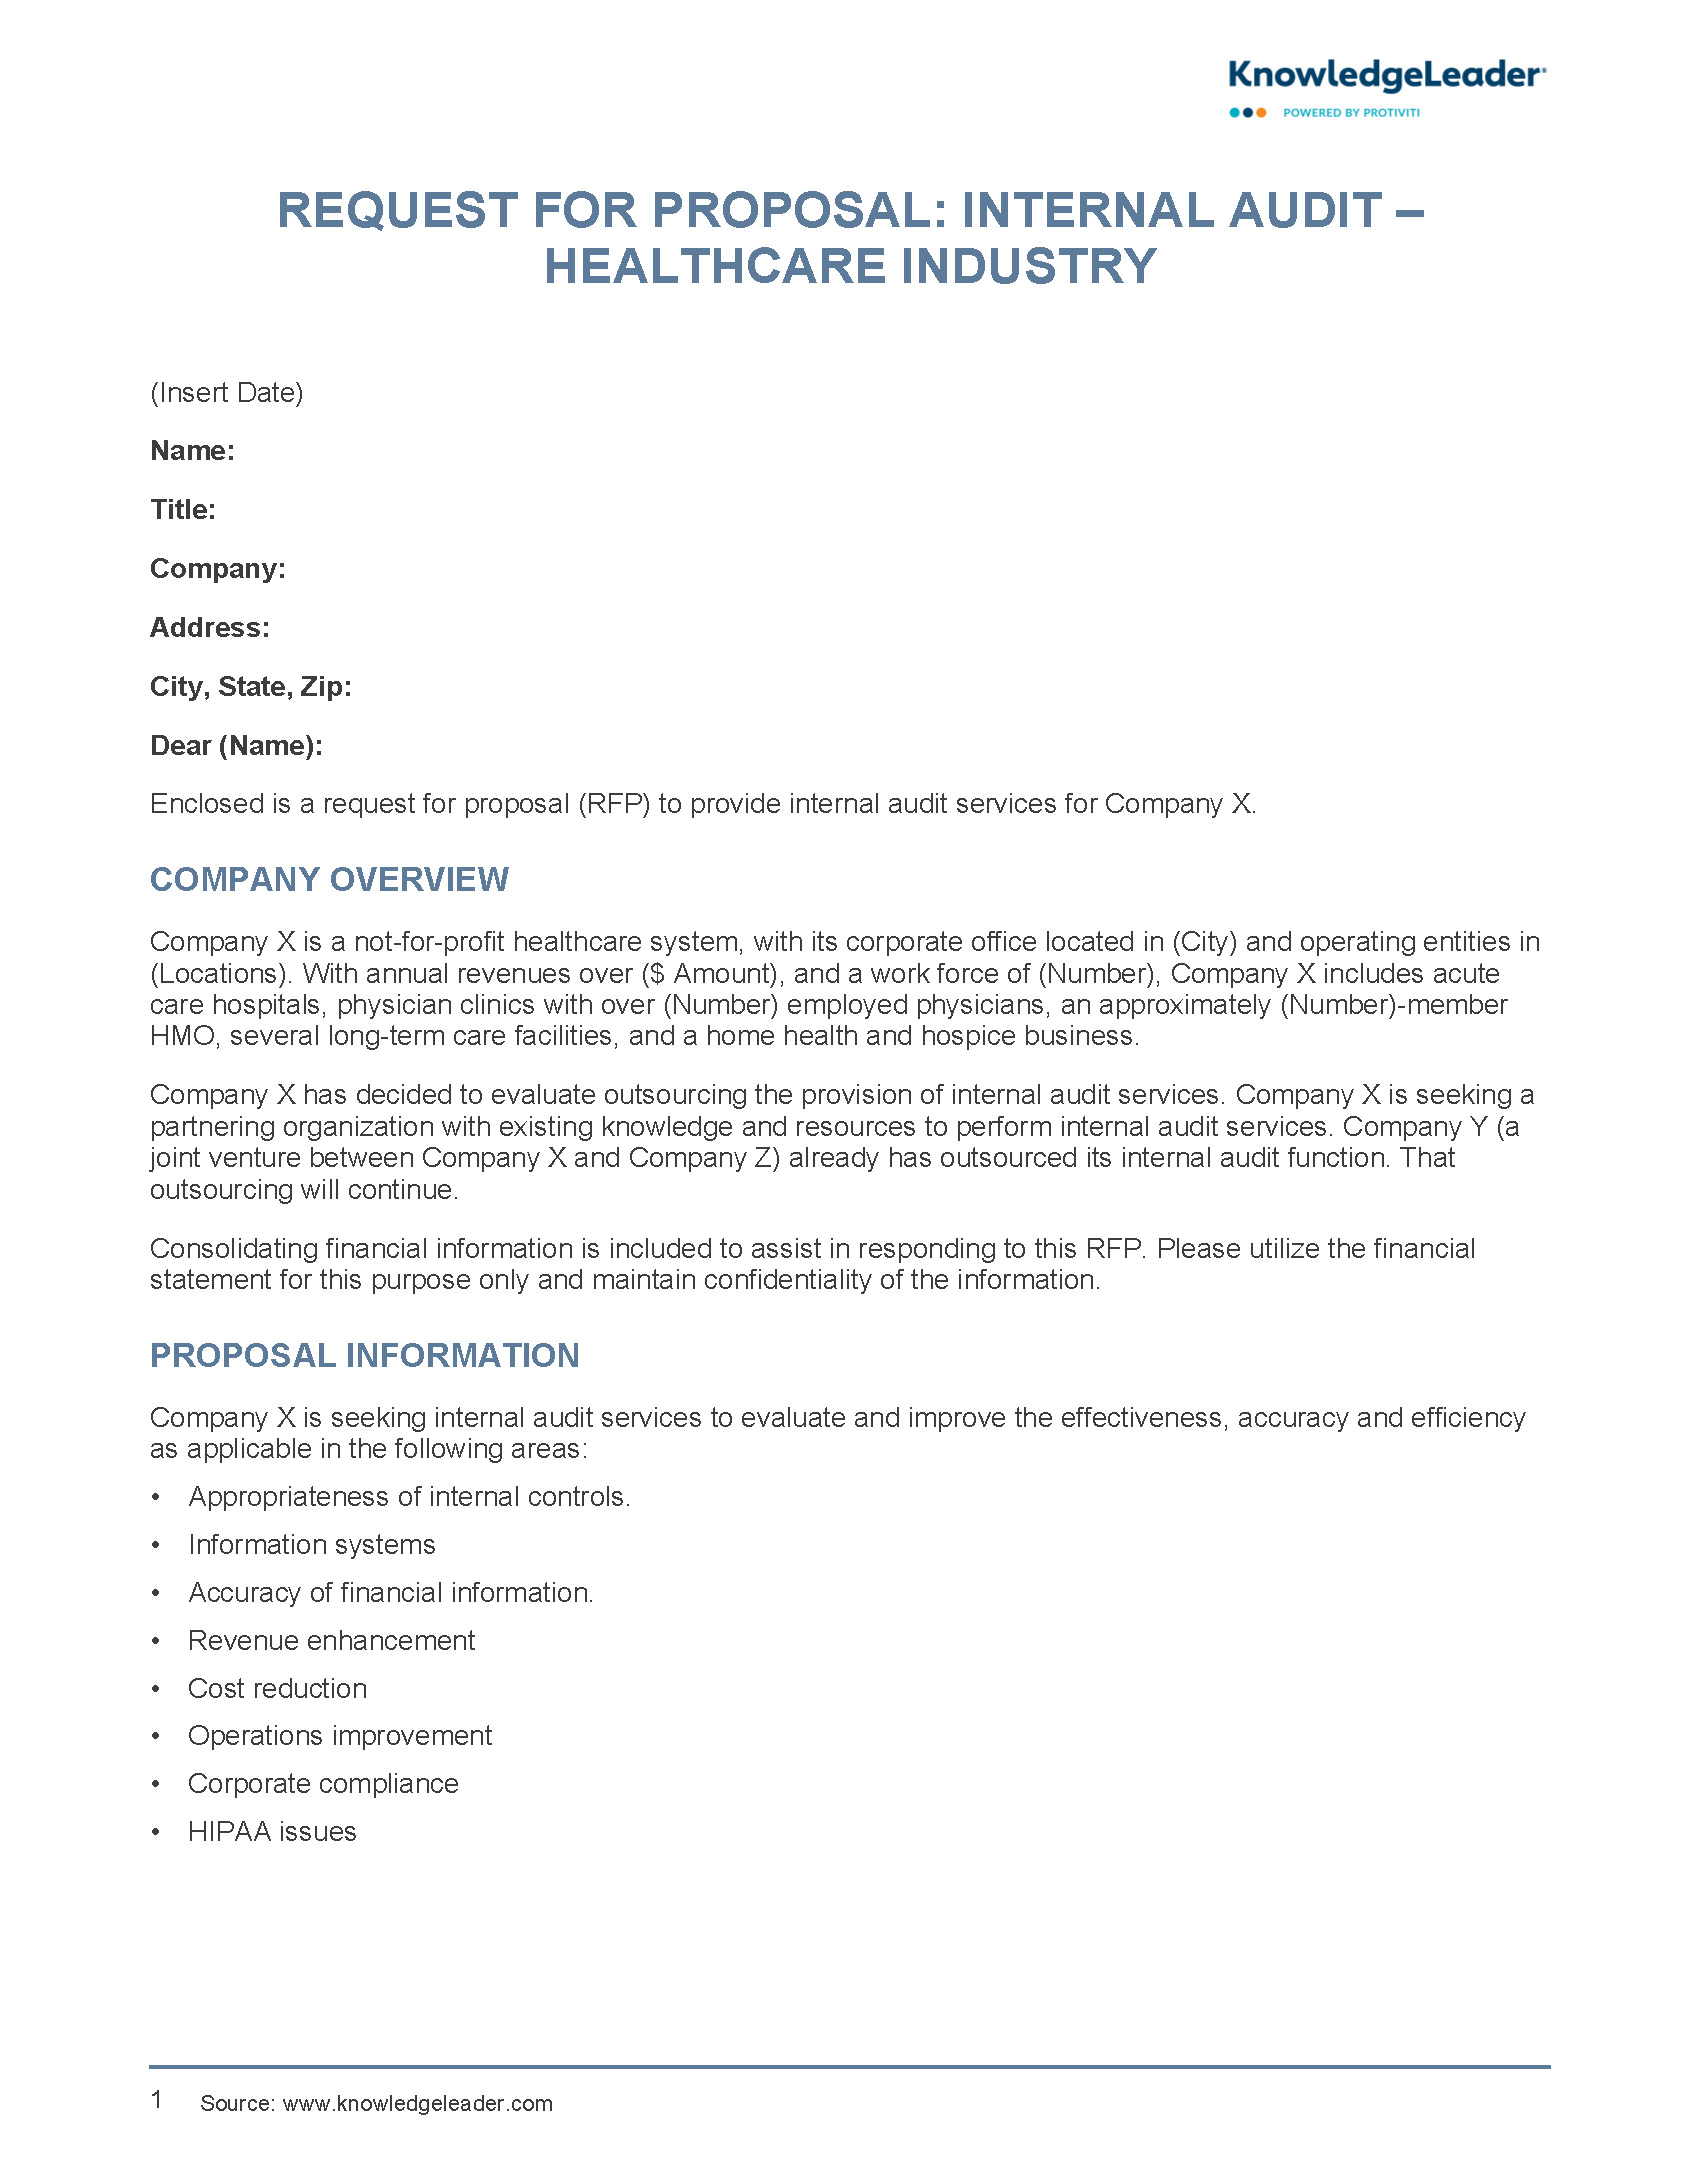 Request for Proposal Internal Audit – Healthcare Industry